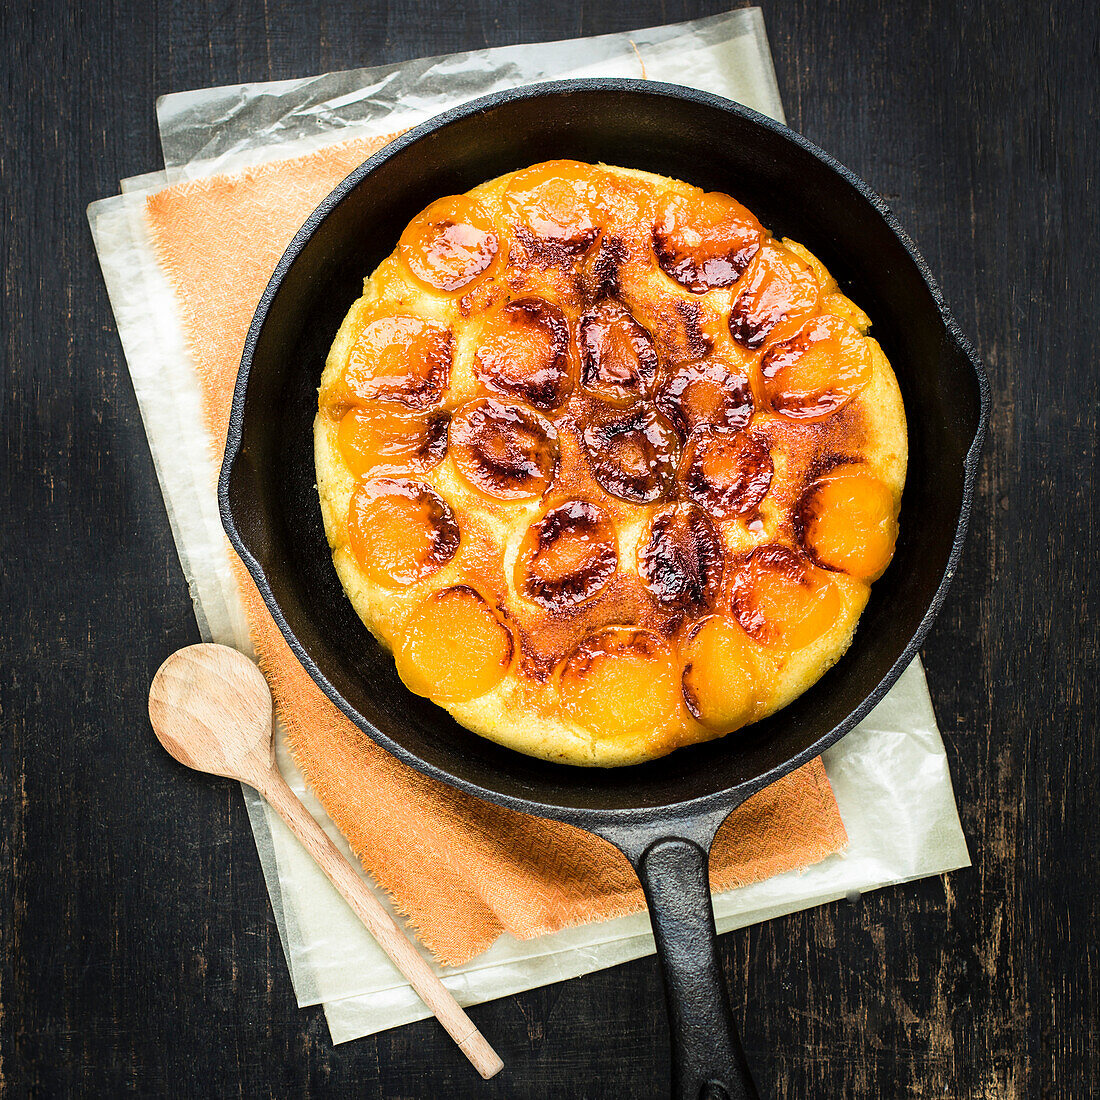 Apricot cake baked in a Cast Iron Pan